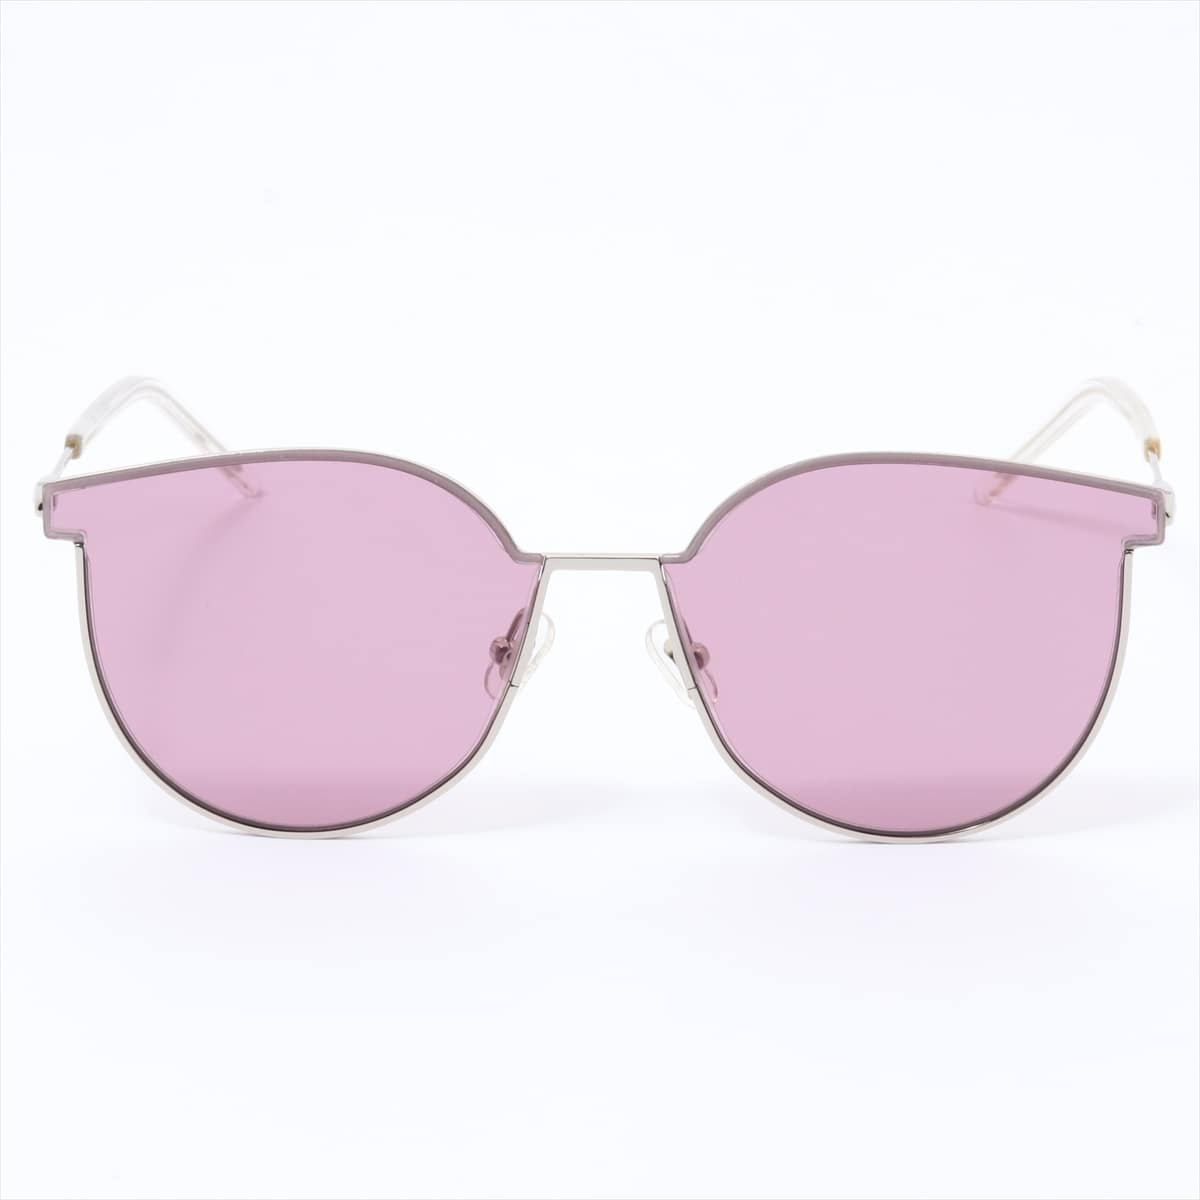 Gentle Monster Sunglasses Plastic pink purple Comes with a box